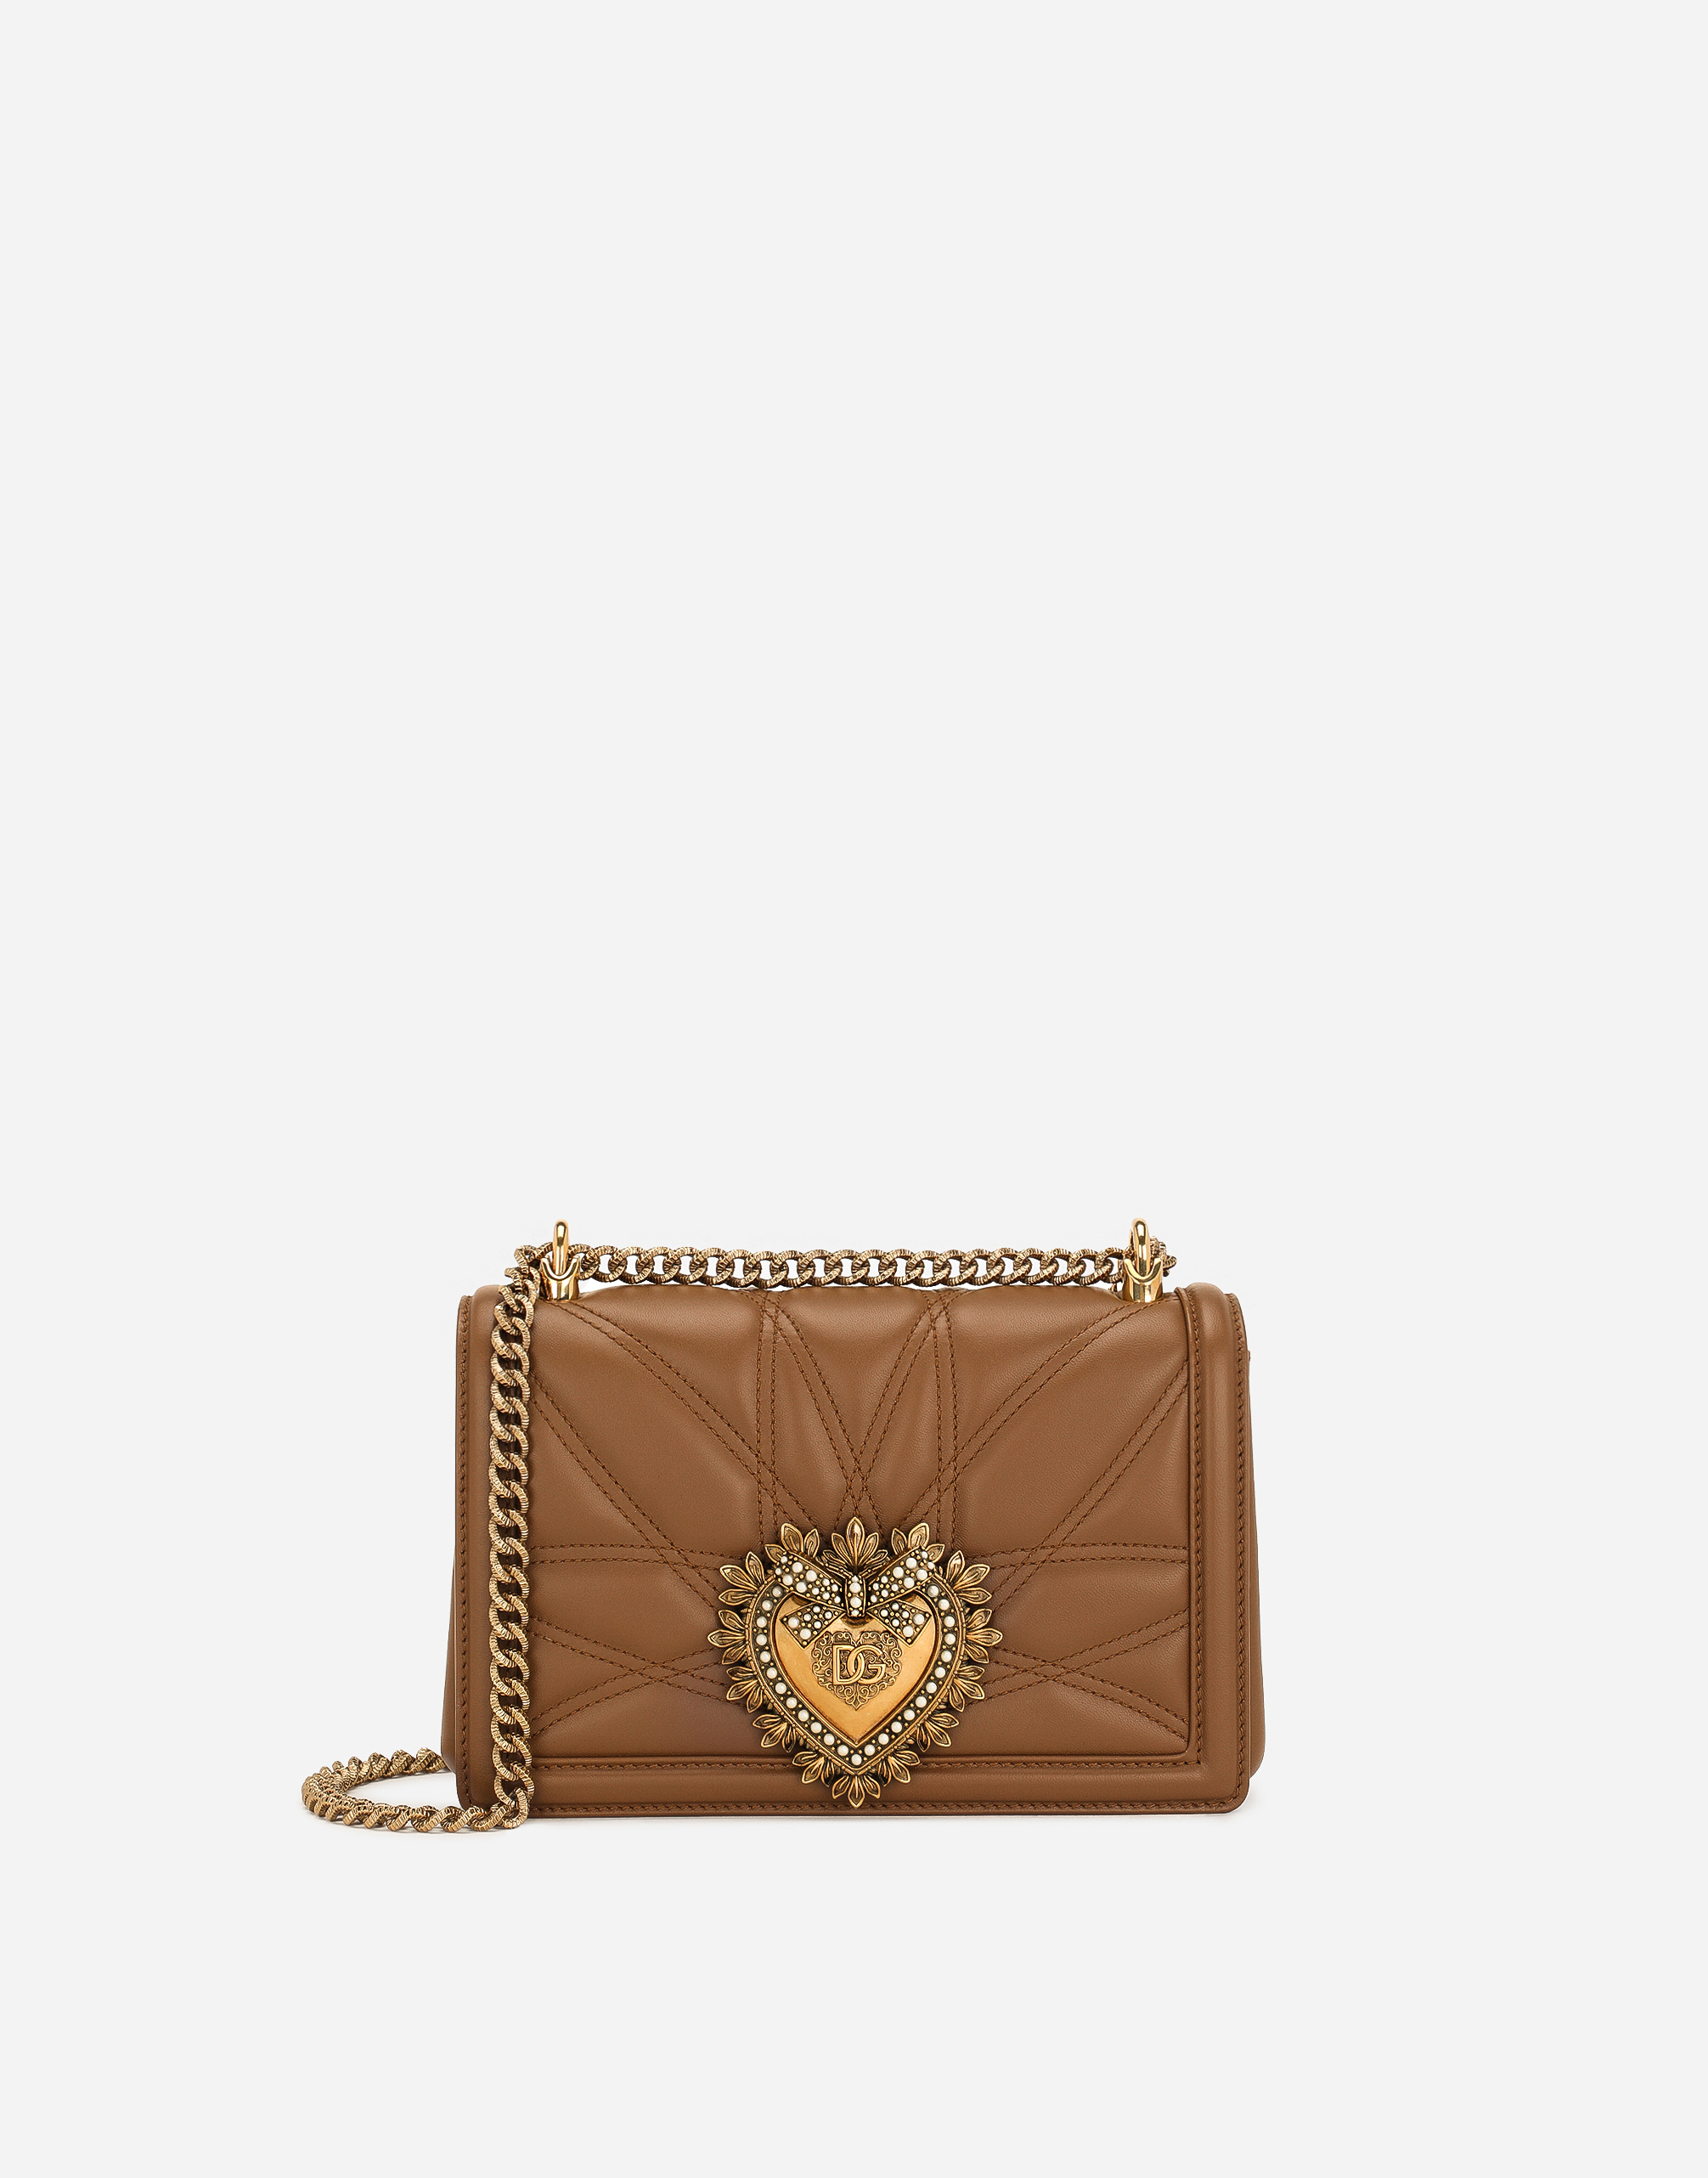 Medium Devotion bag in quilted nappa leather in Beige